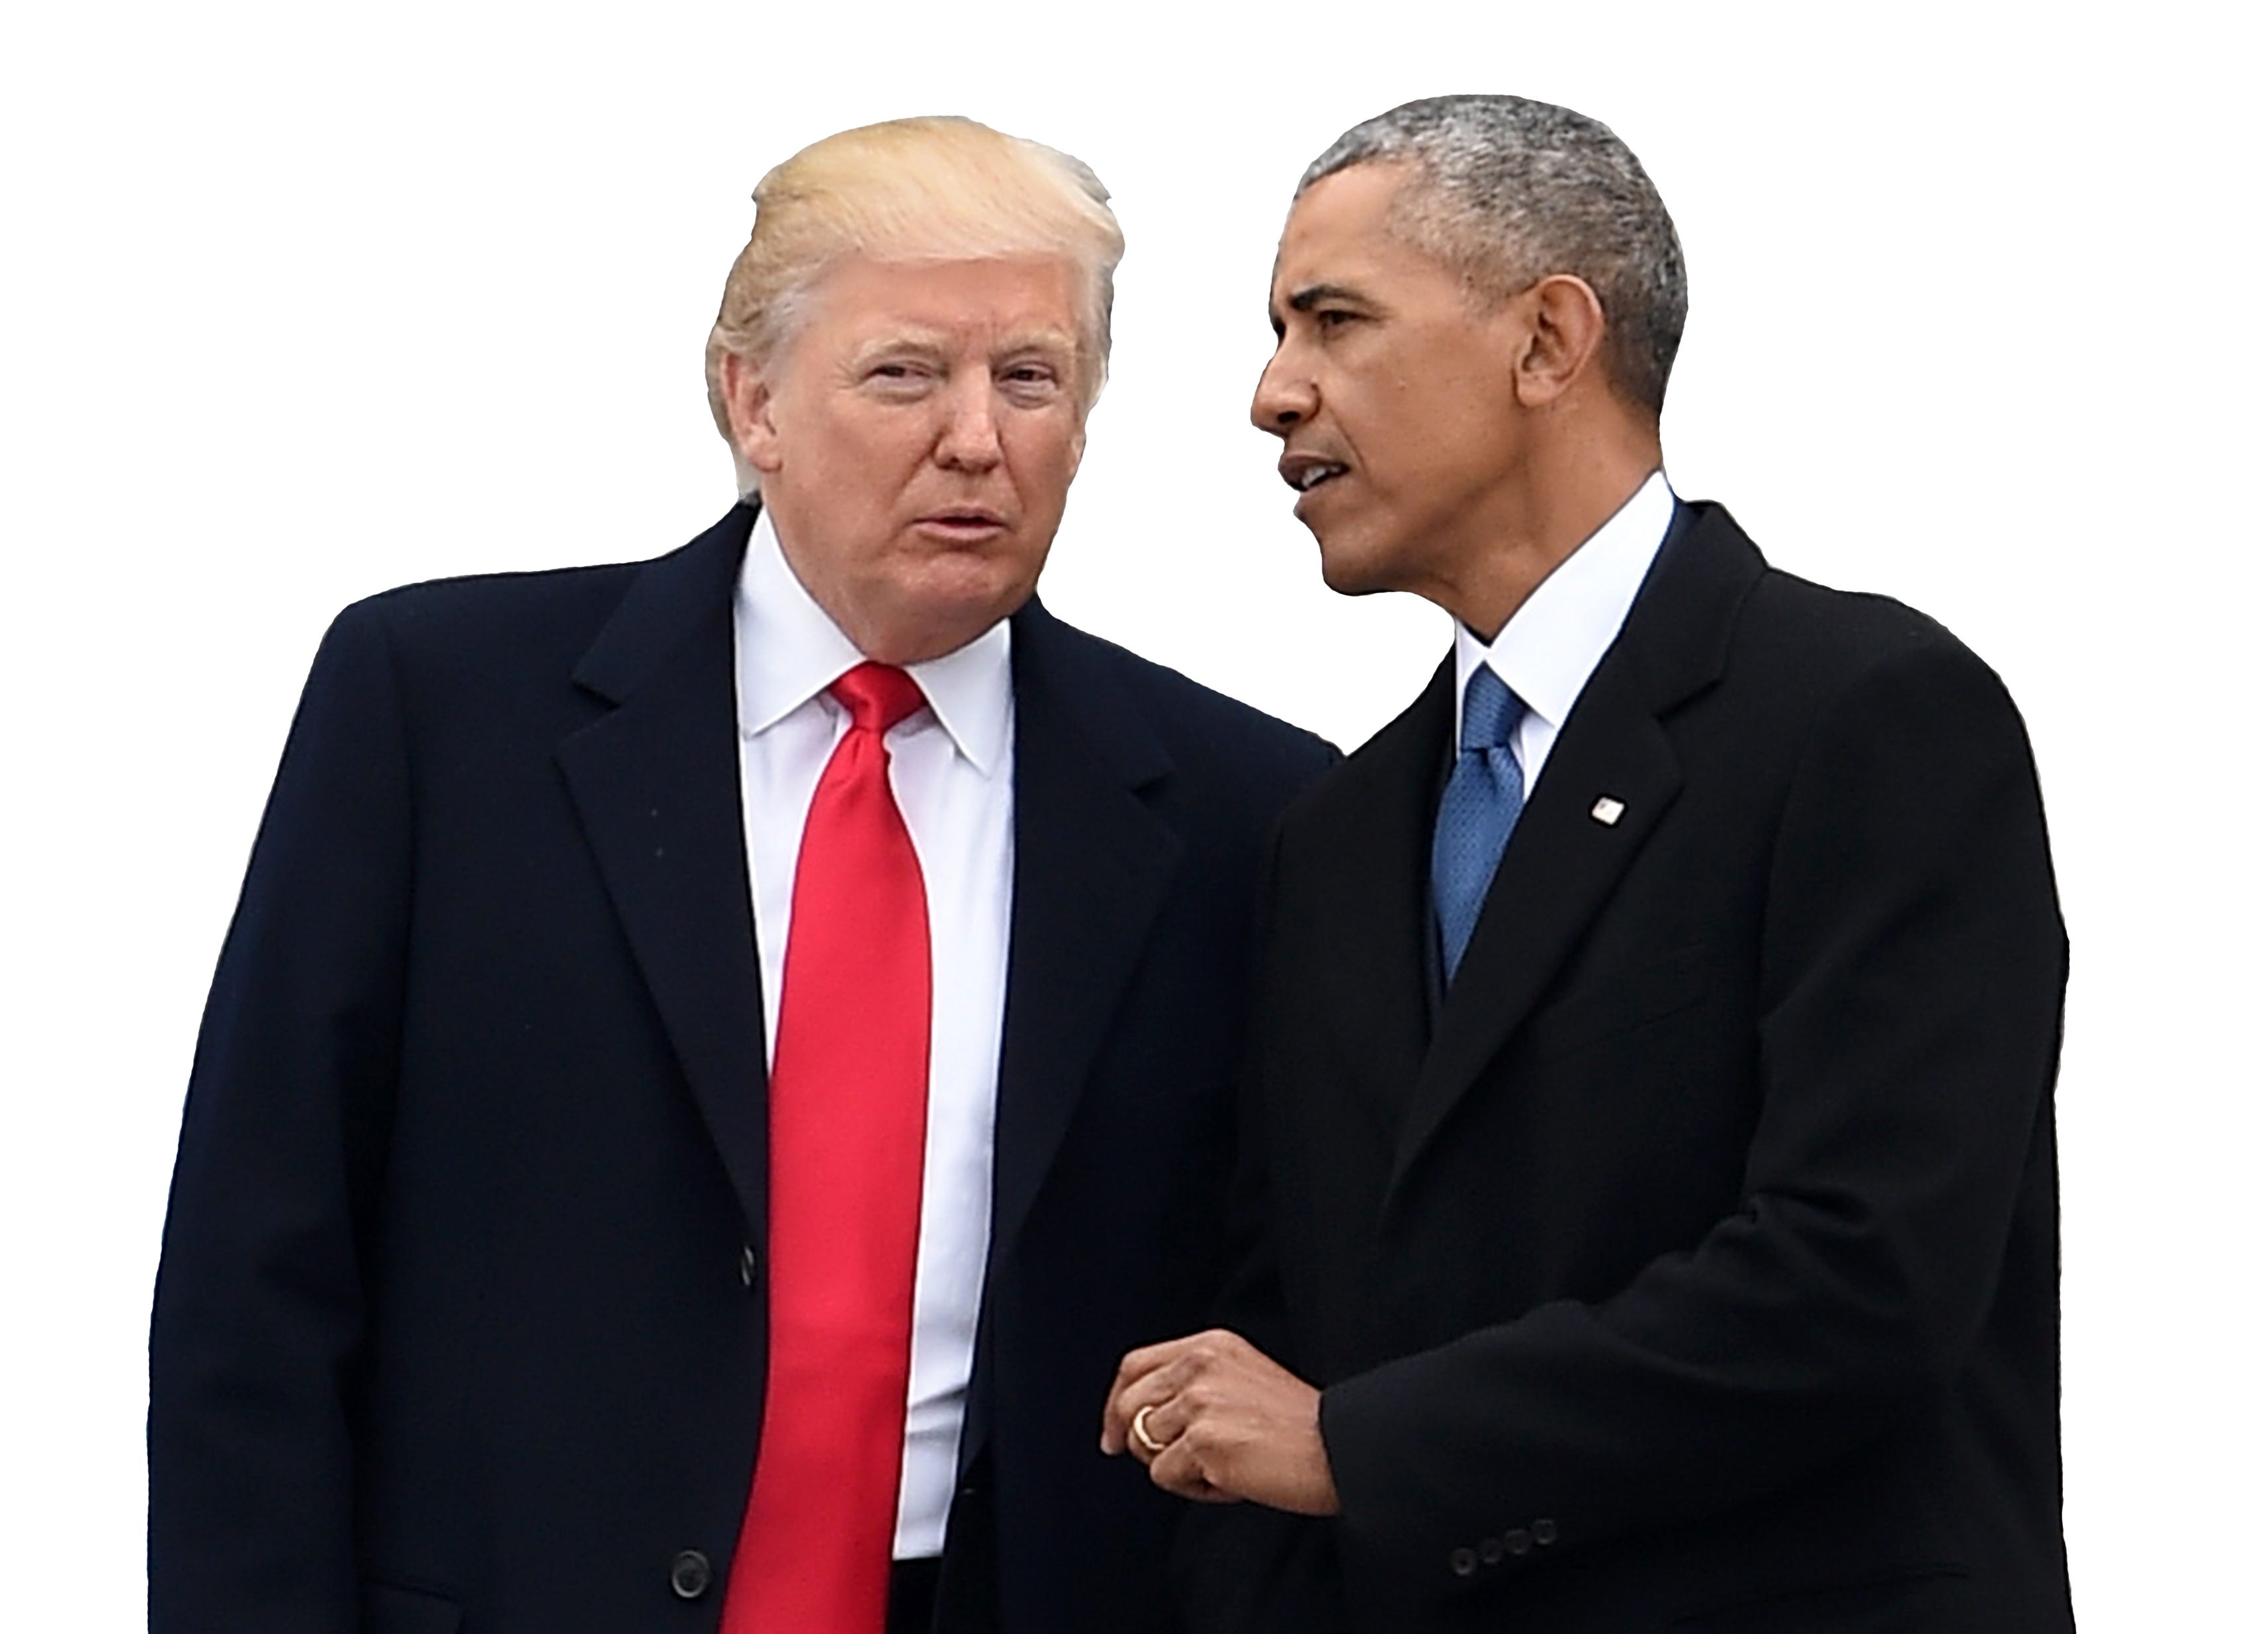 Donald Trump, Barack Obama tie for most admired man in Gallup poll | Patriots Daily News3428 x 2470